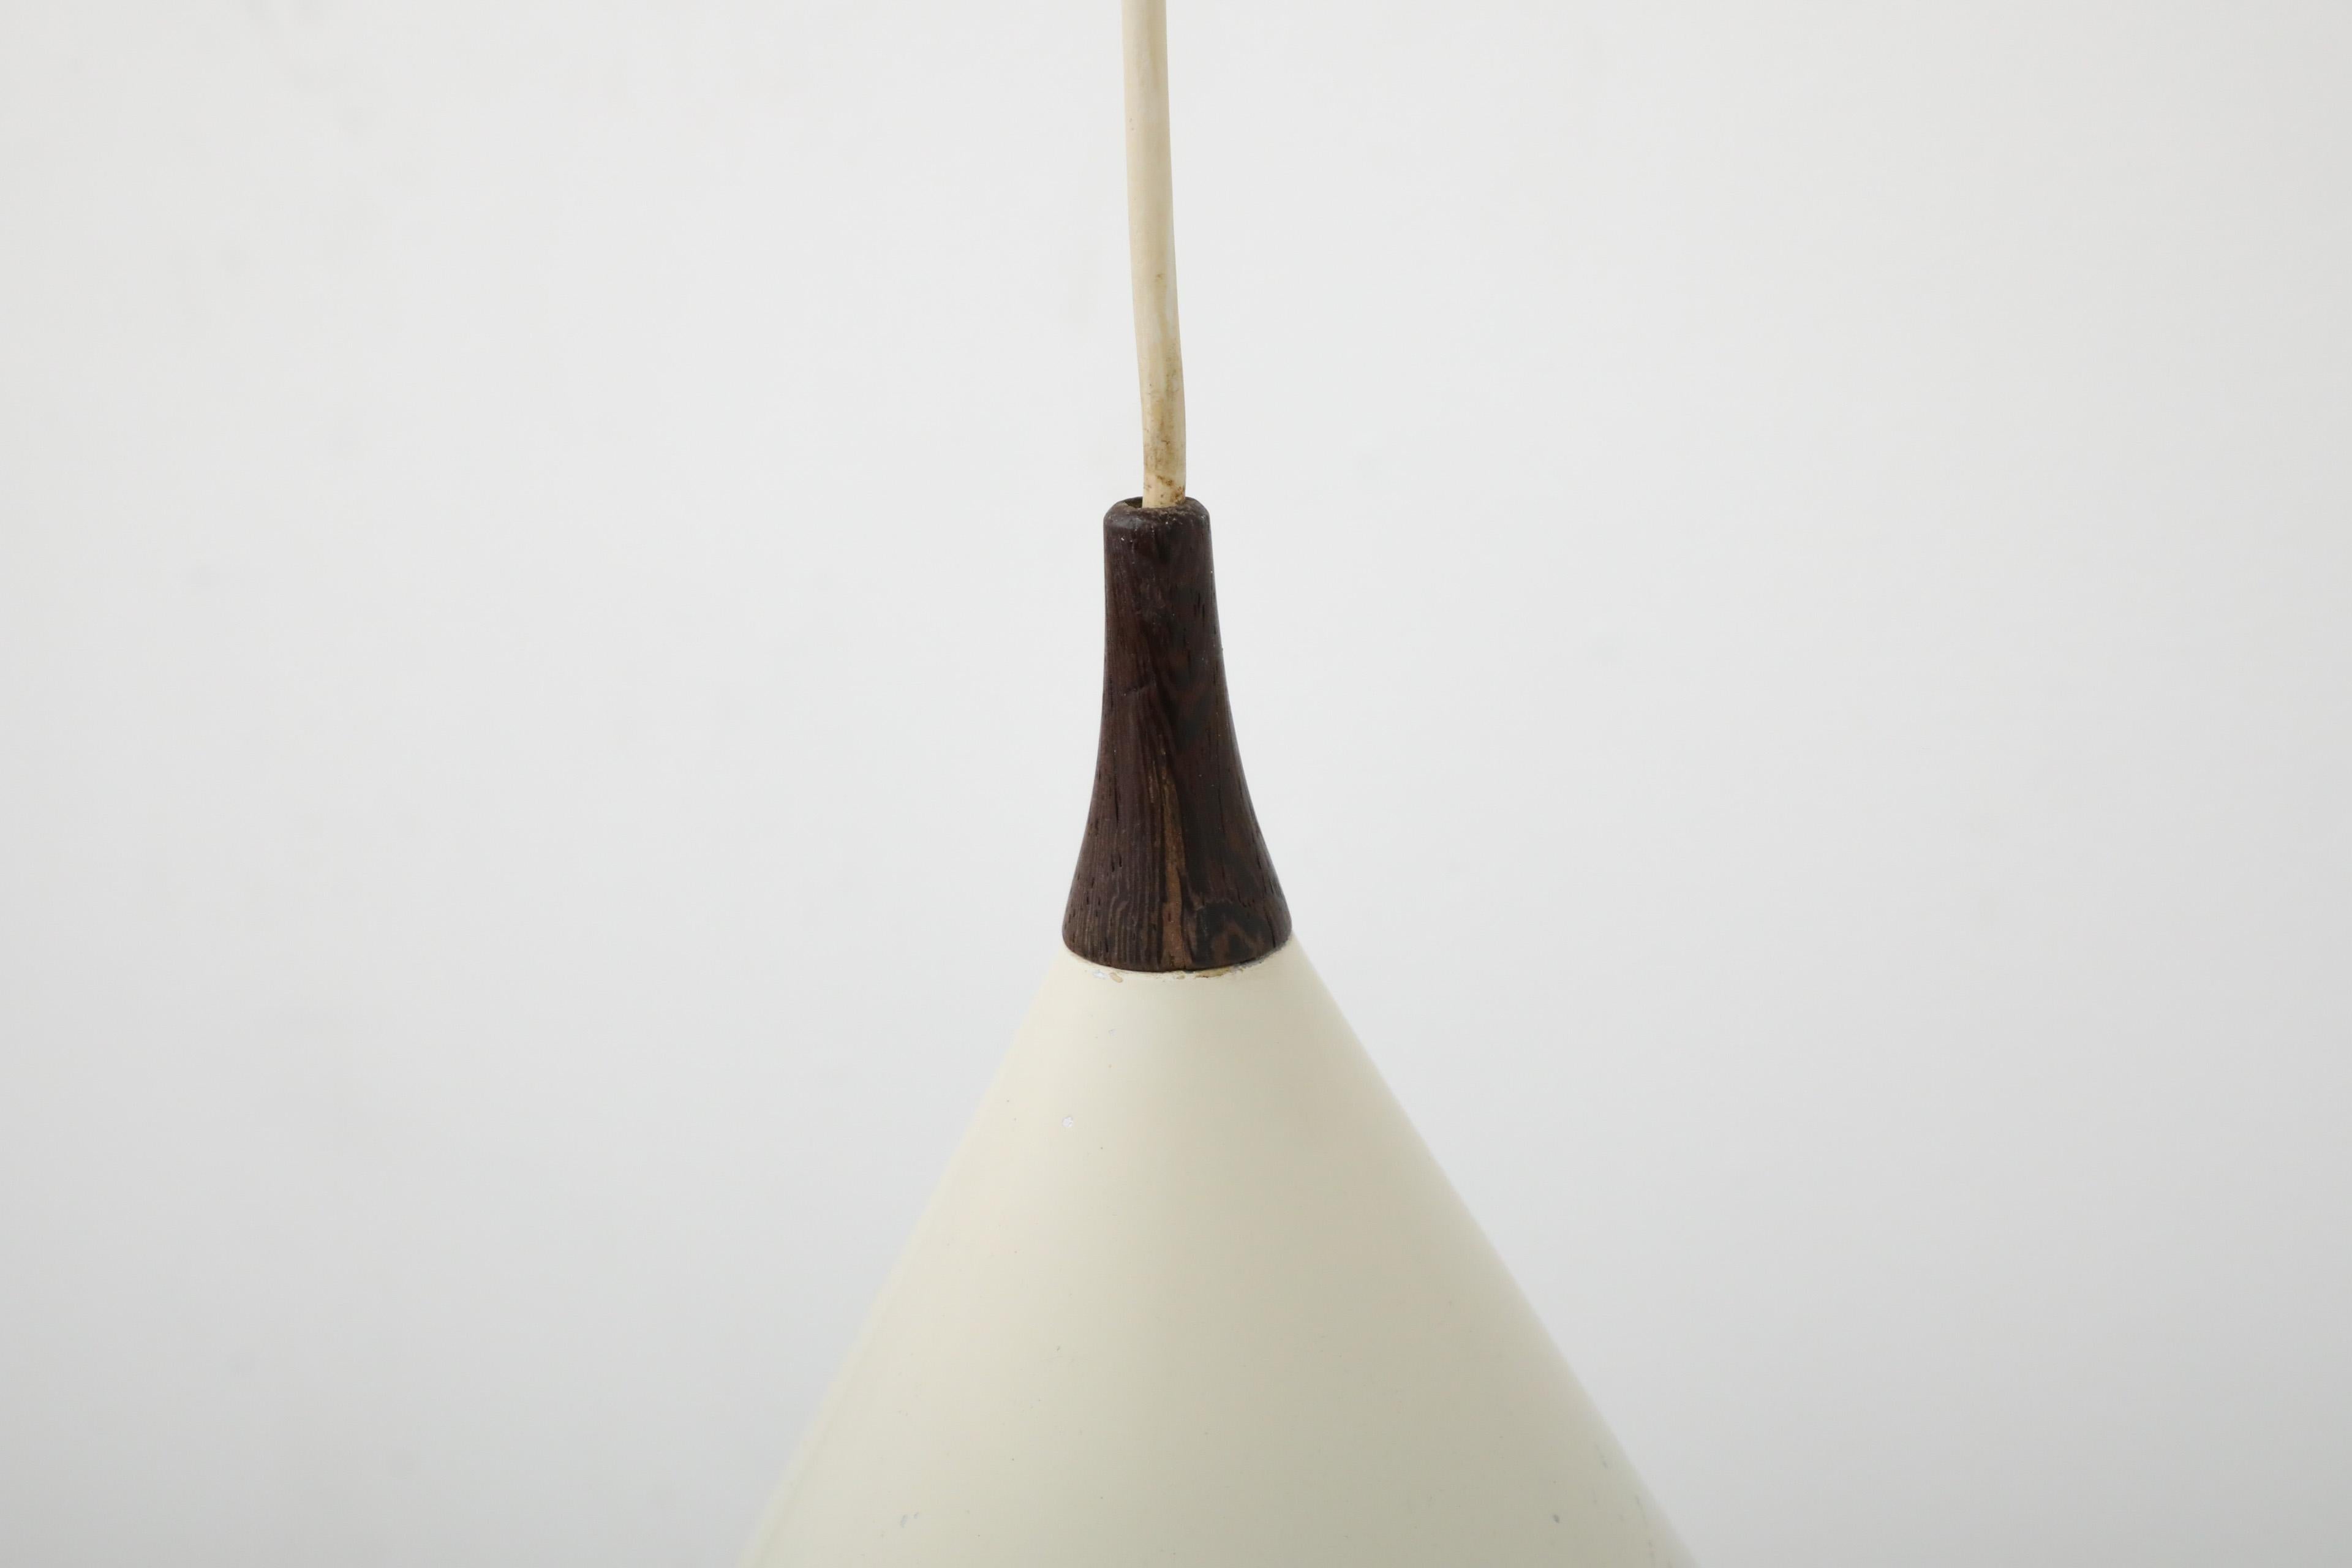 Rare Willem Hagoort Wall Sconce w/ White Enameled Metal Cone Shade & Teak Mount For Sale 13